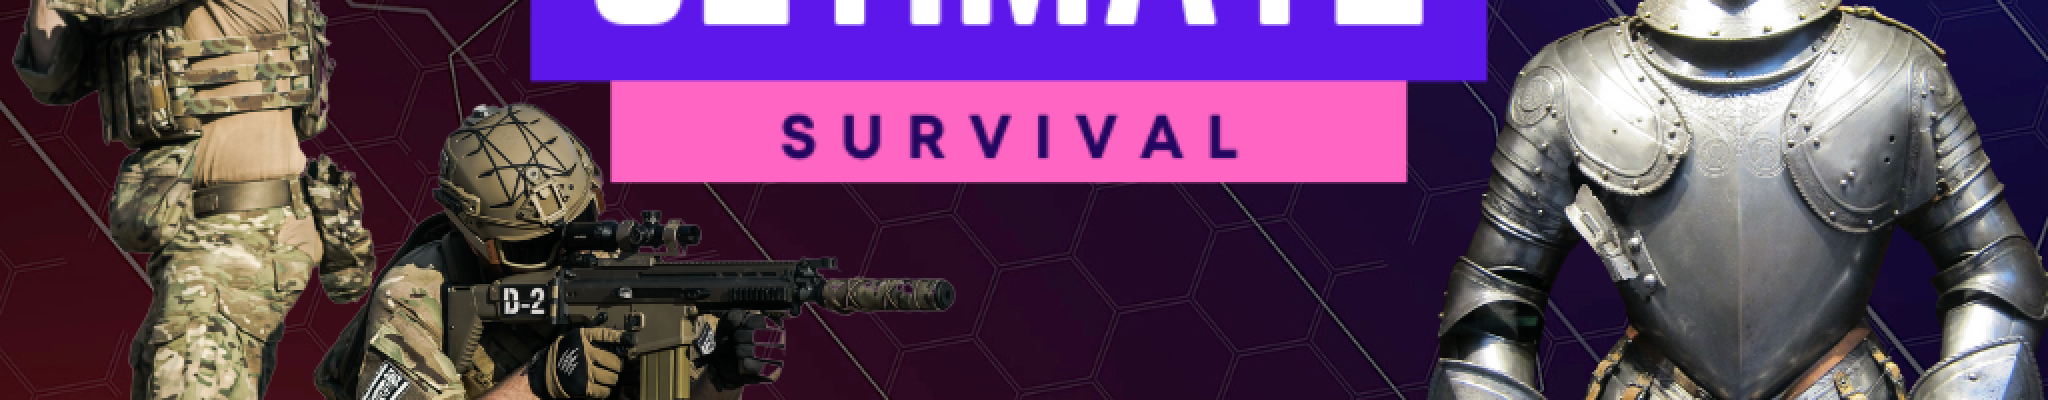 Ultimate-survival-poster.png